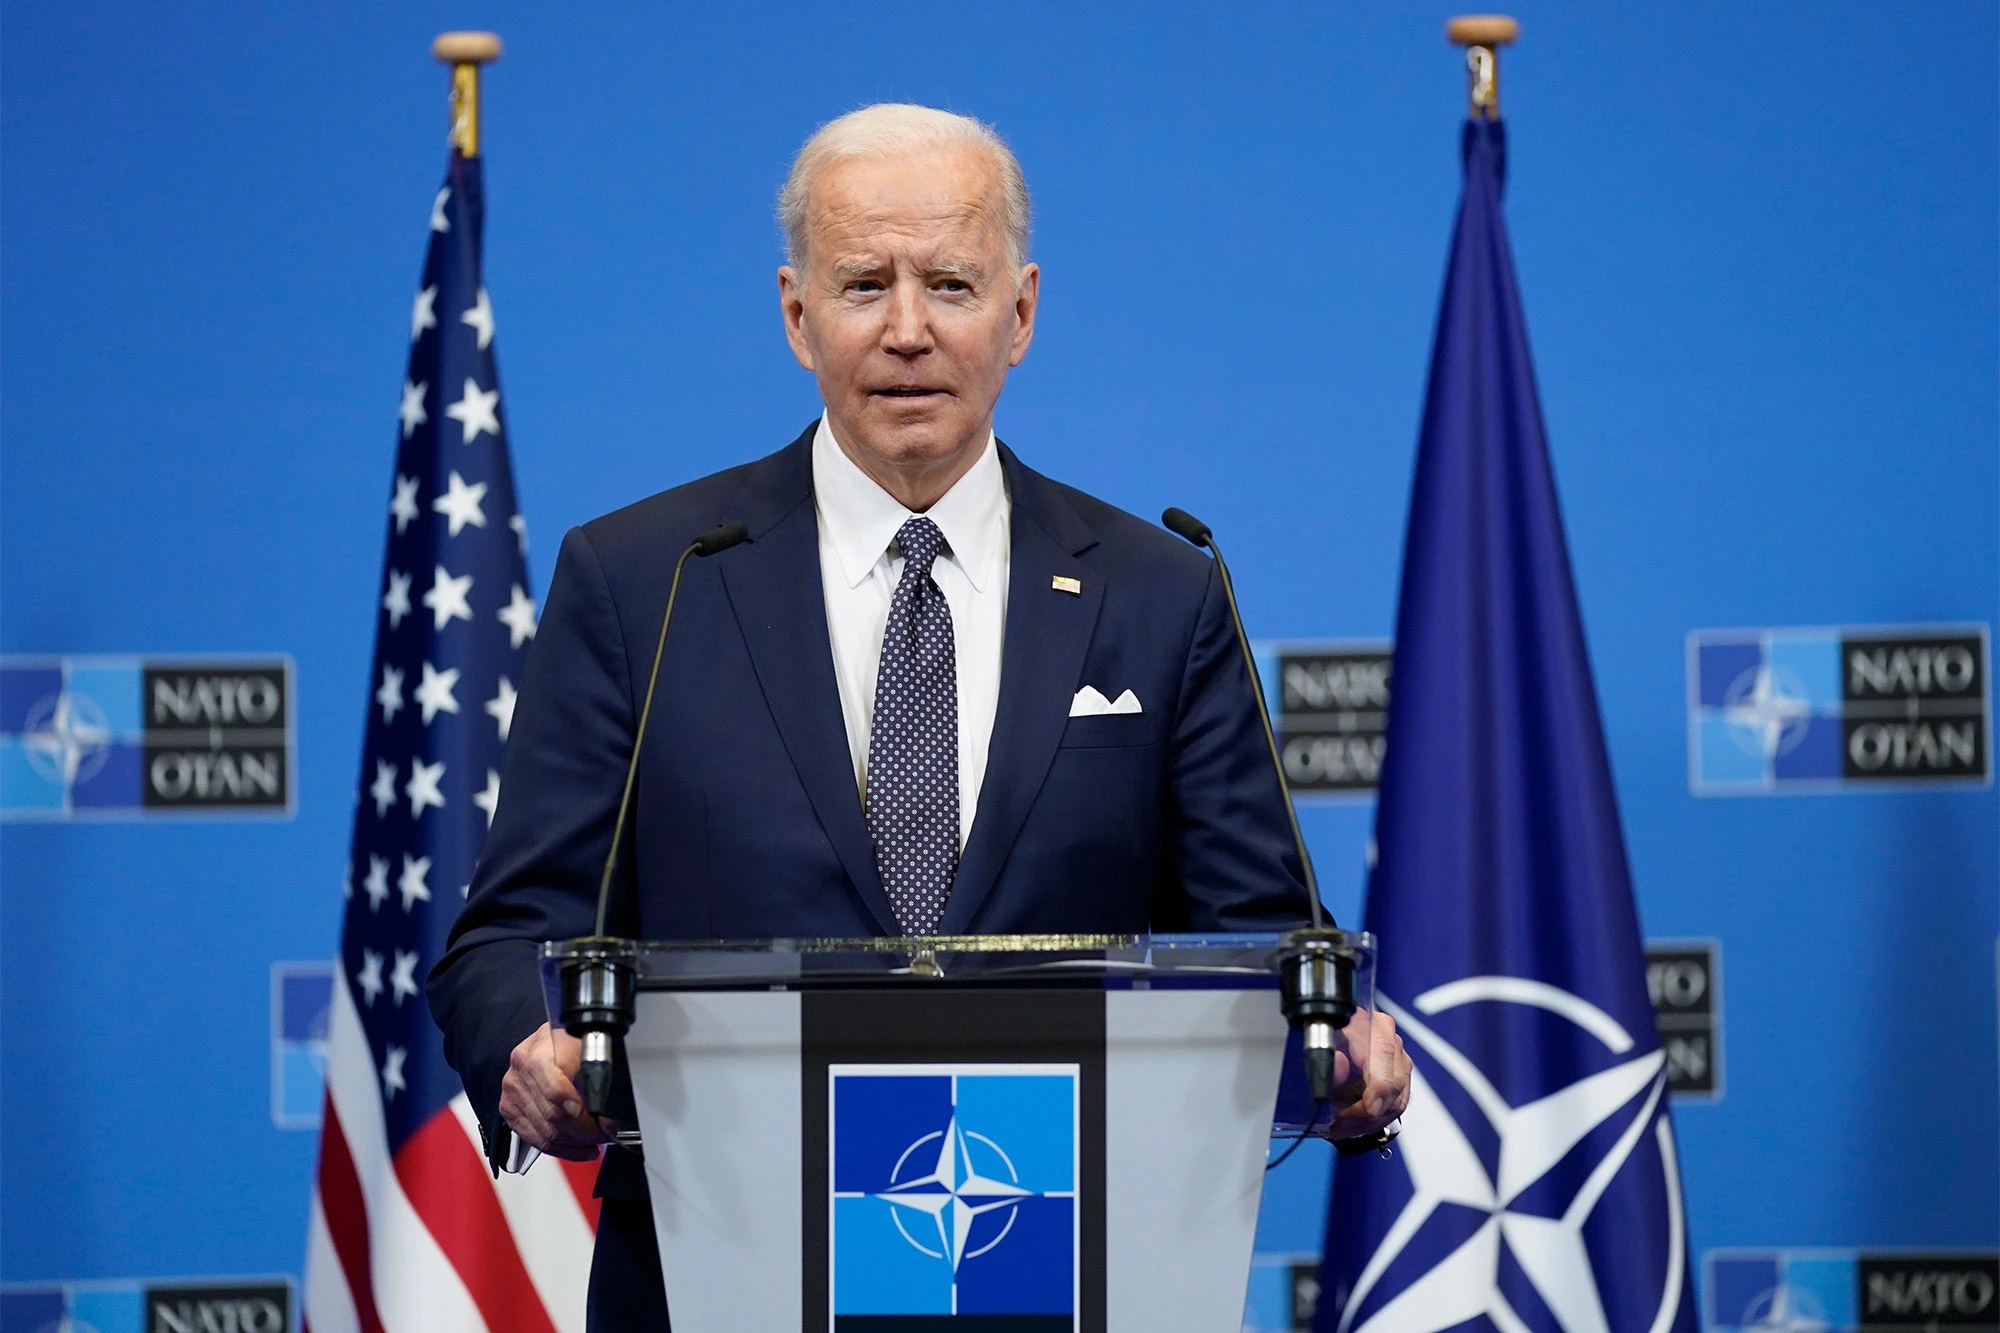 Ag and Food Tech Startups Raised $52B in 2021, Biden Warns of Food Shortage + More